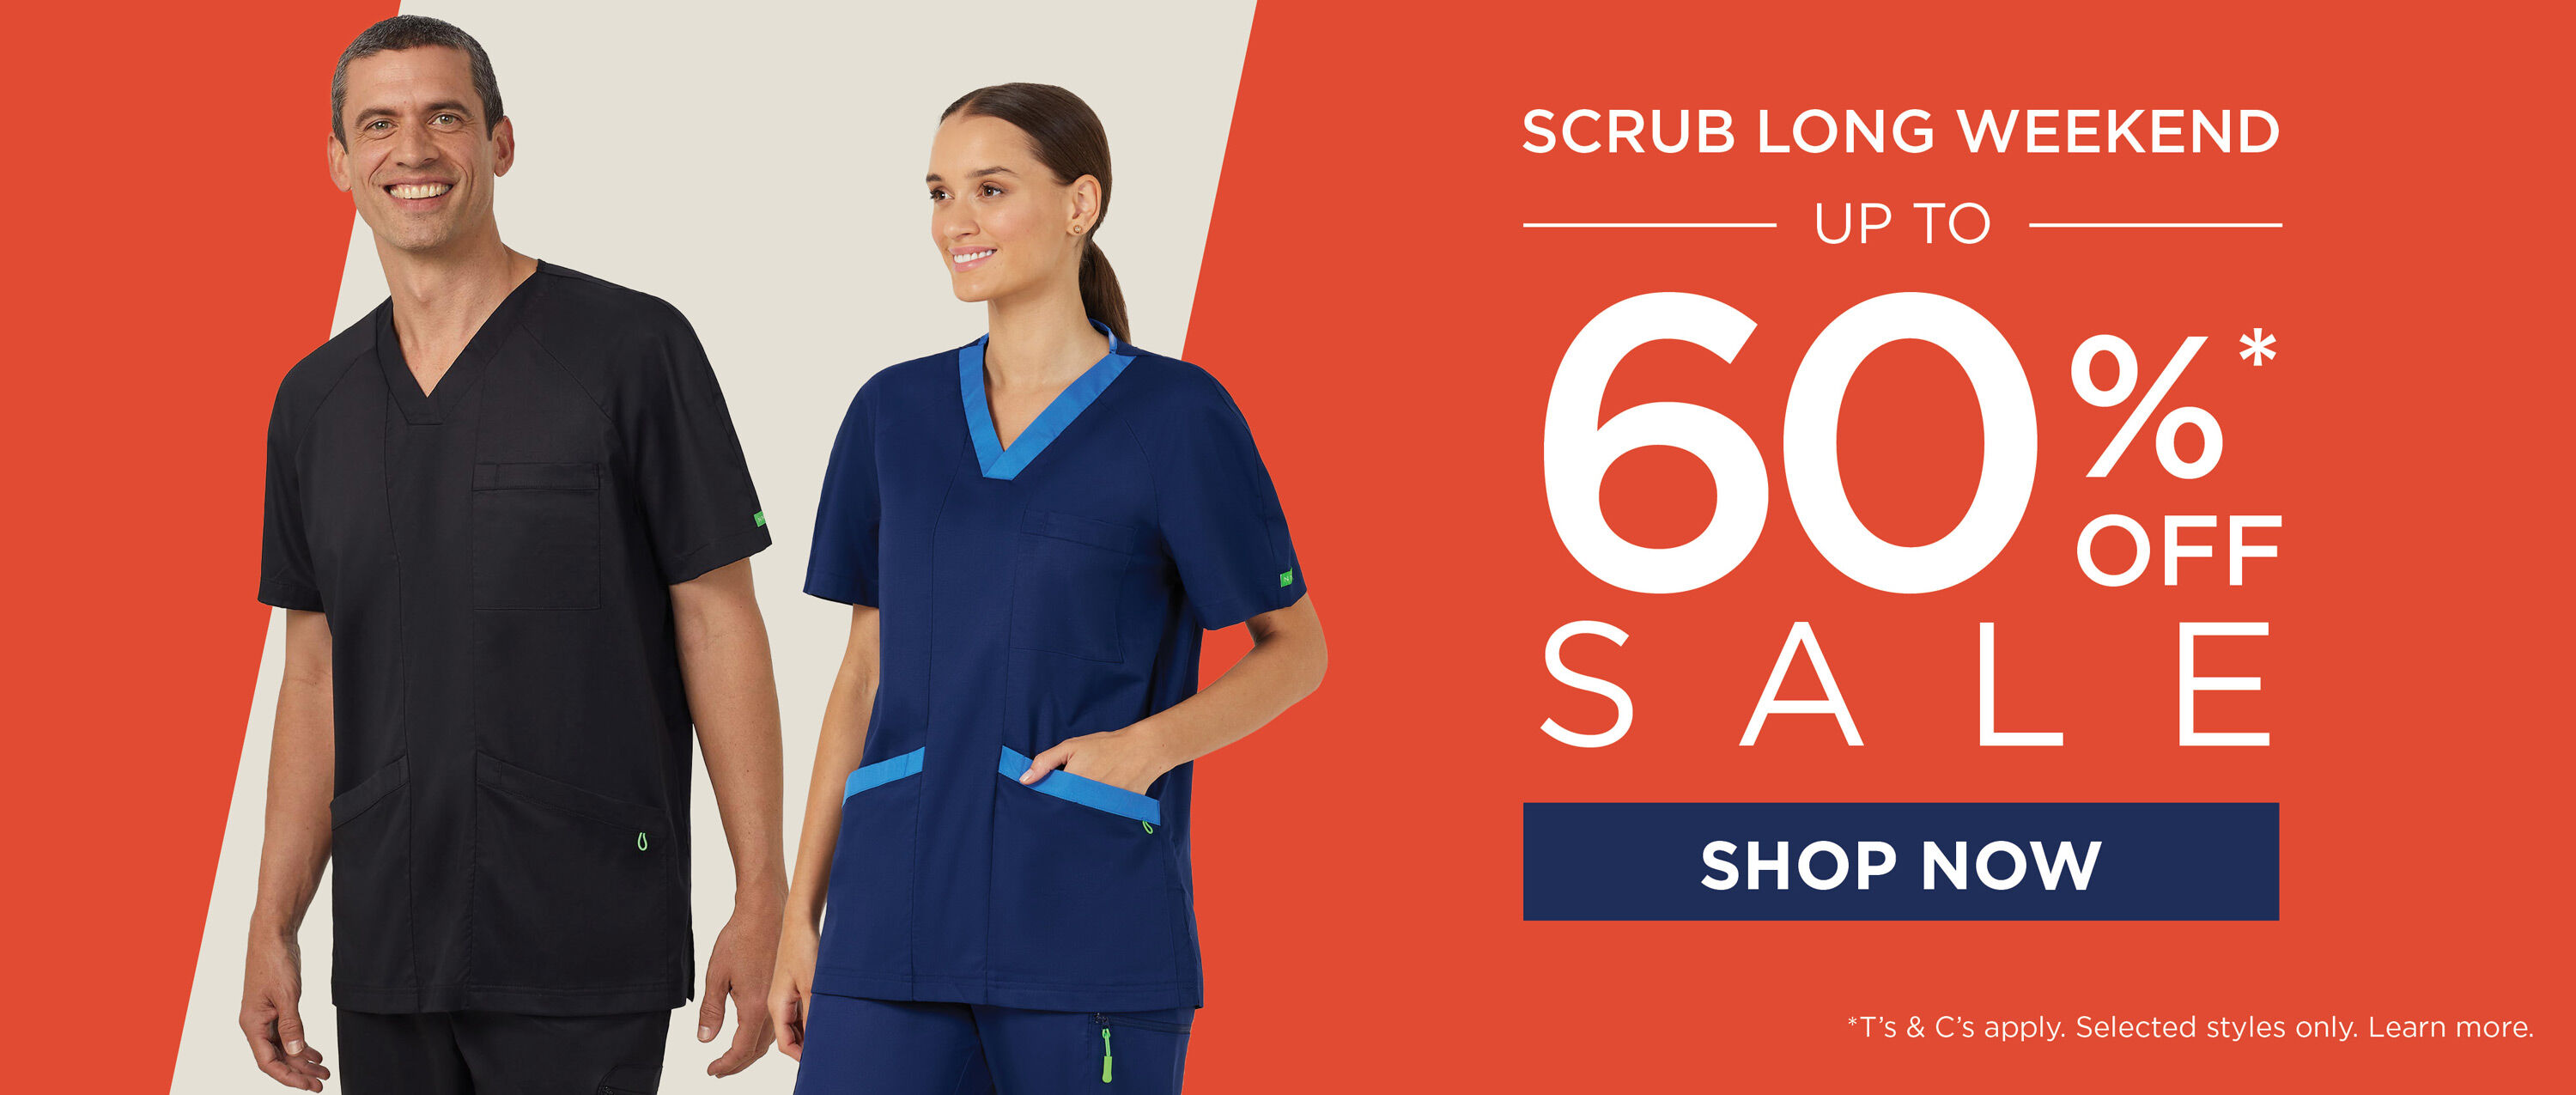 Scrub Long Weekend Sale up to 60% off*